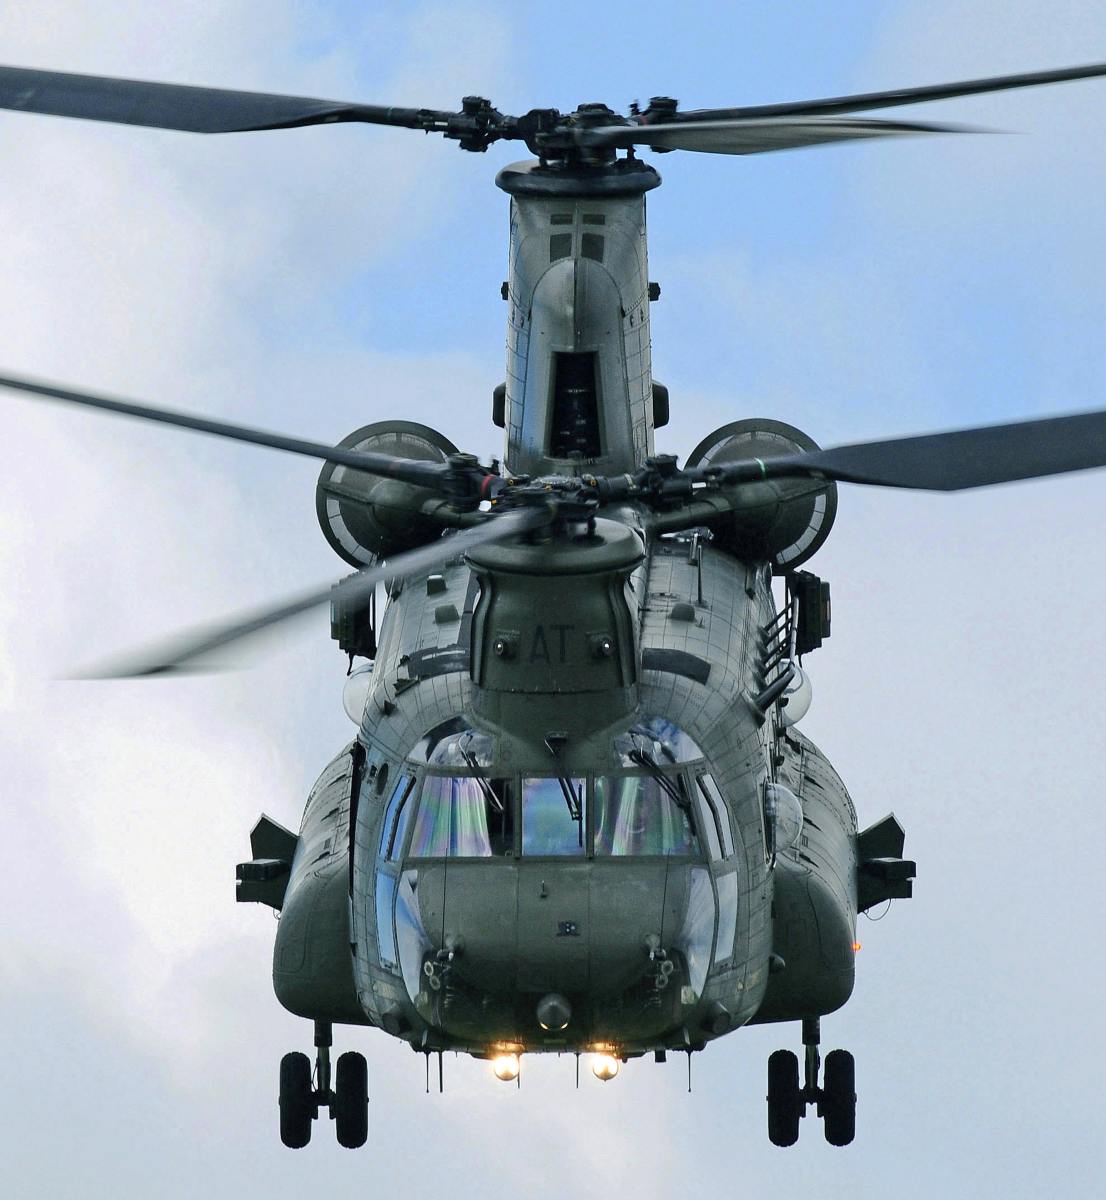 Check out this list of the 7 fastest military choppers!